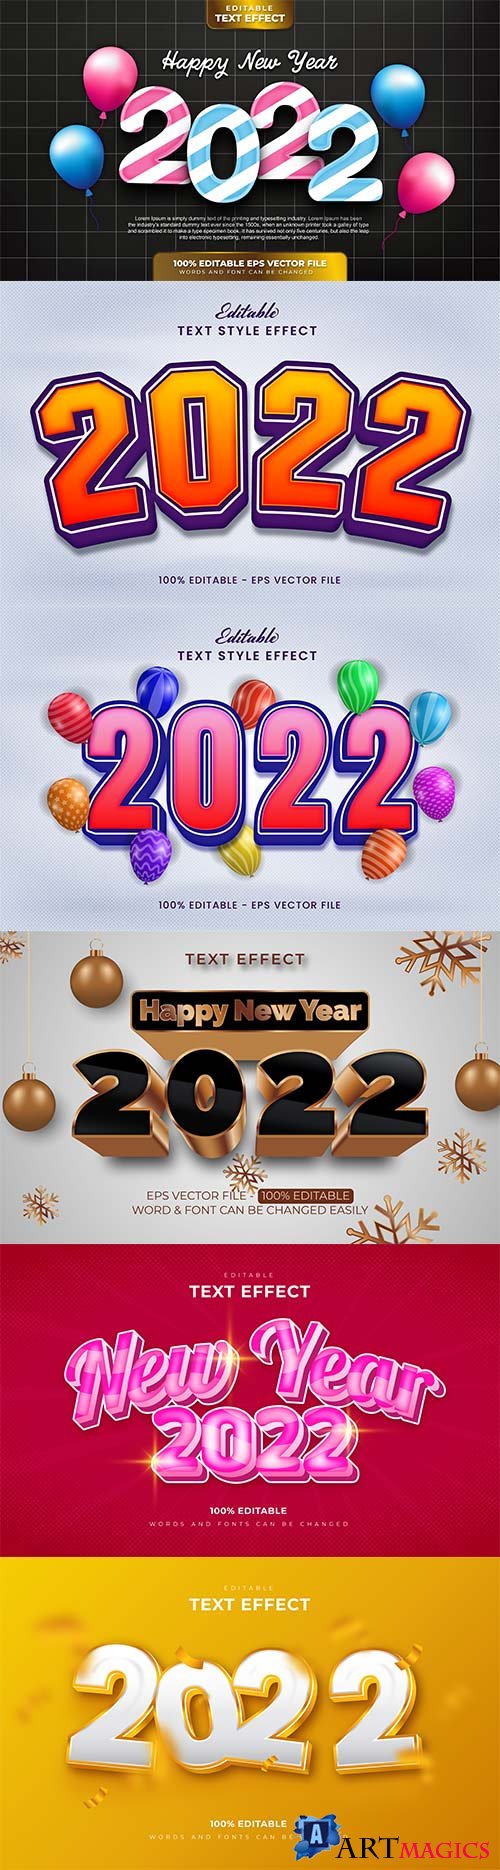 Merry christmas and happy new year 2022 editable vector text effects vol 13